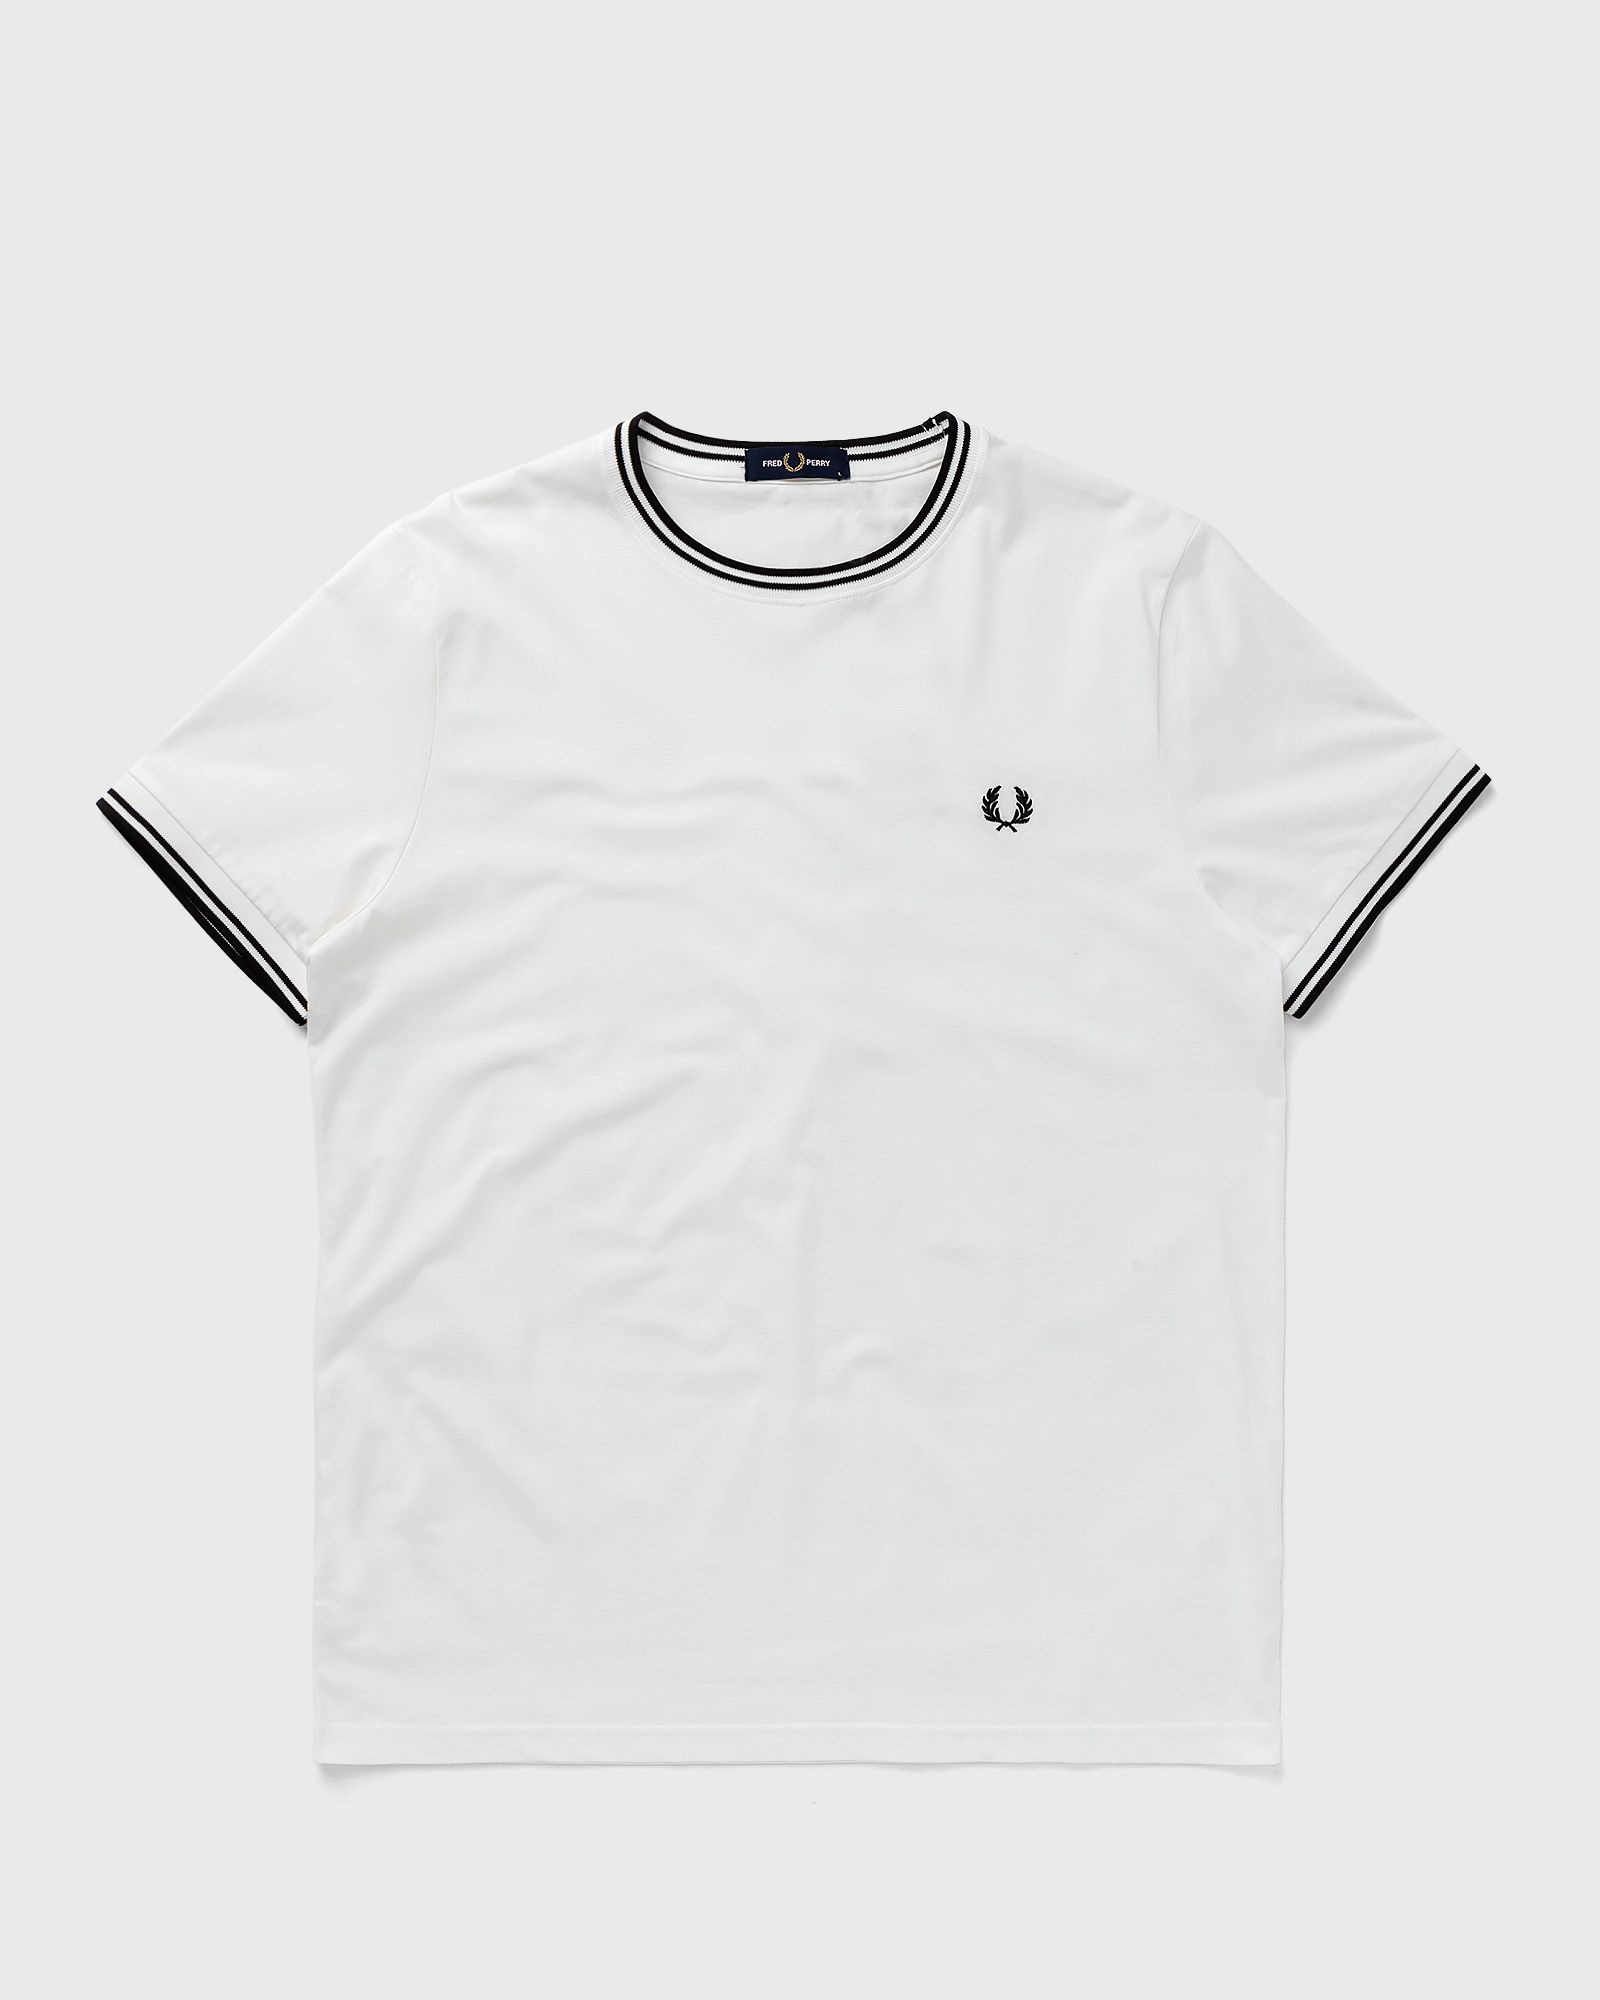 Fred Perry TWIN TIPPED T-SHIRT men Shortsleeves white in Größe:XL von Fred Perry